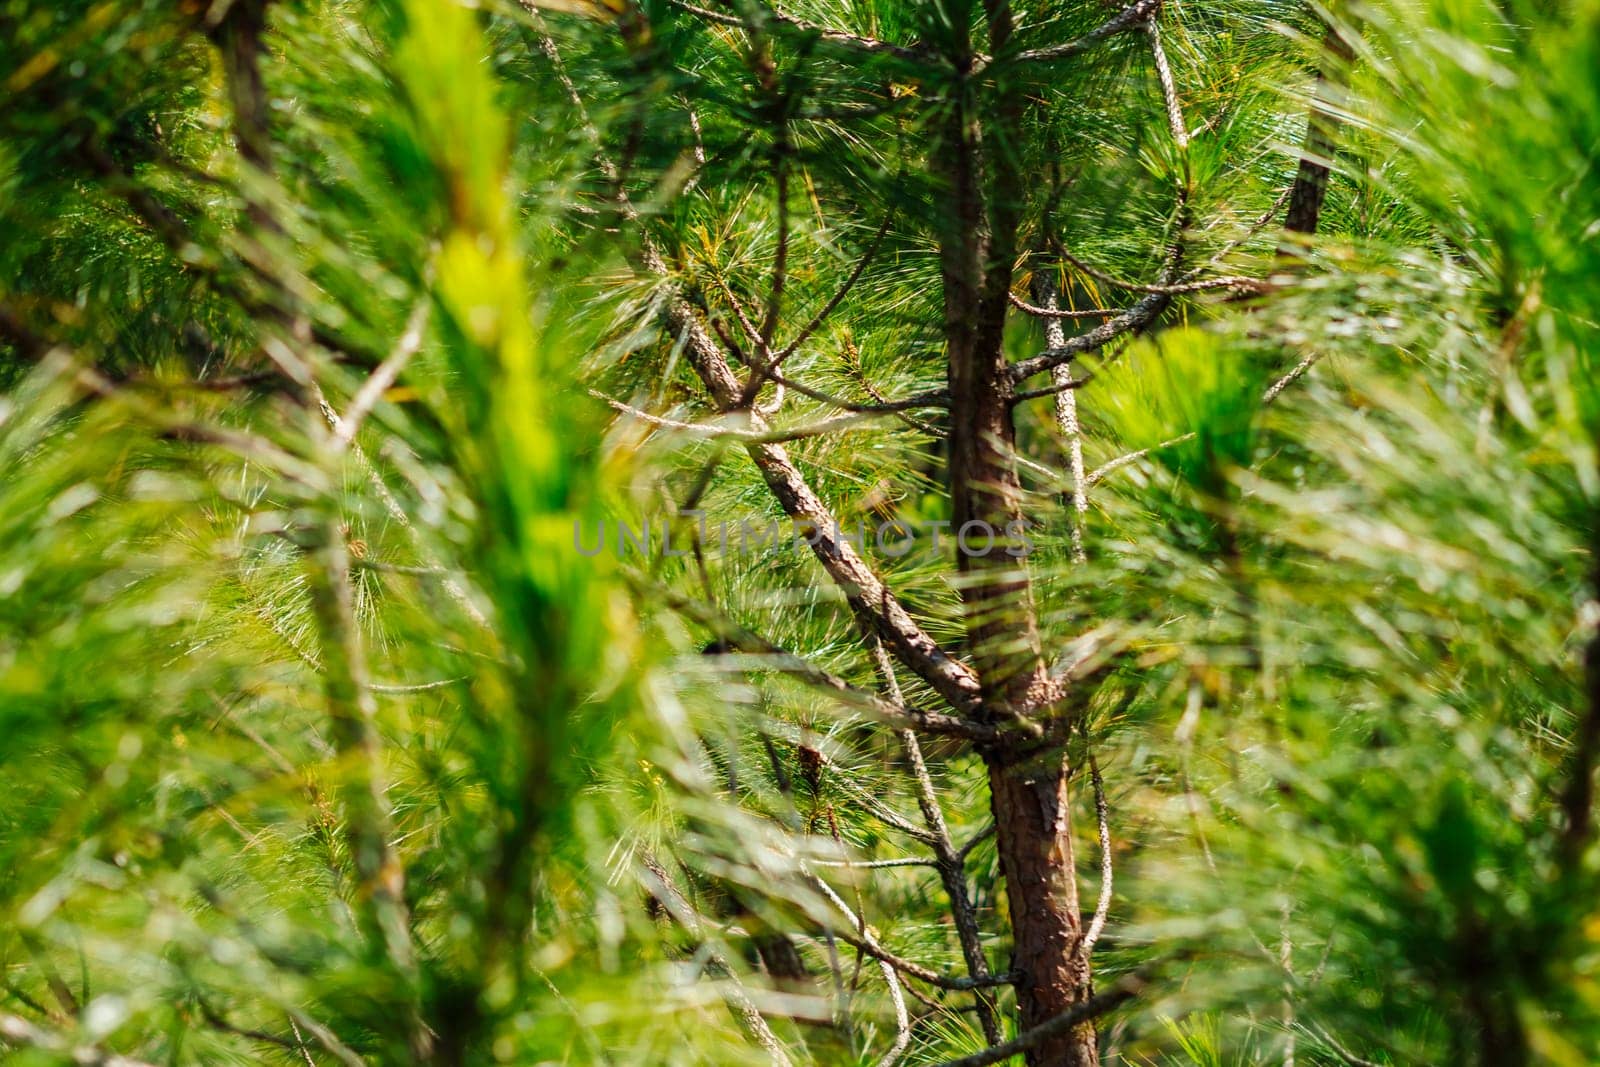 Bright green young pines sun day. Needles branches close up. Coniferous forest. Vietnam Dalat pine wood atmosphere.